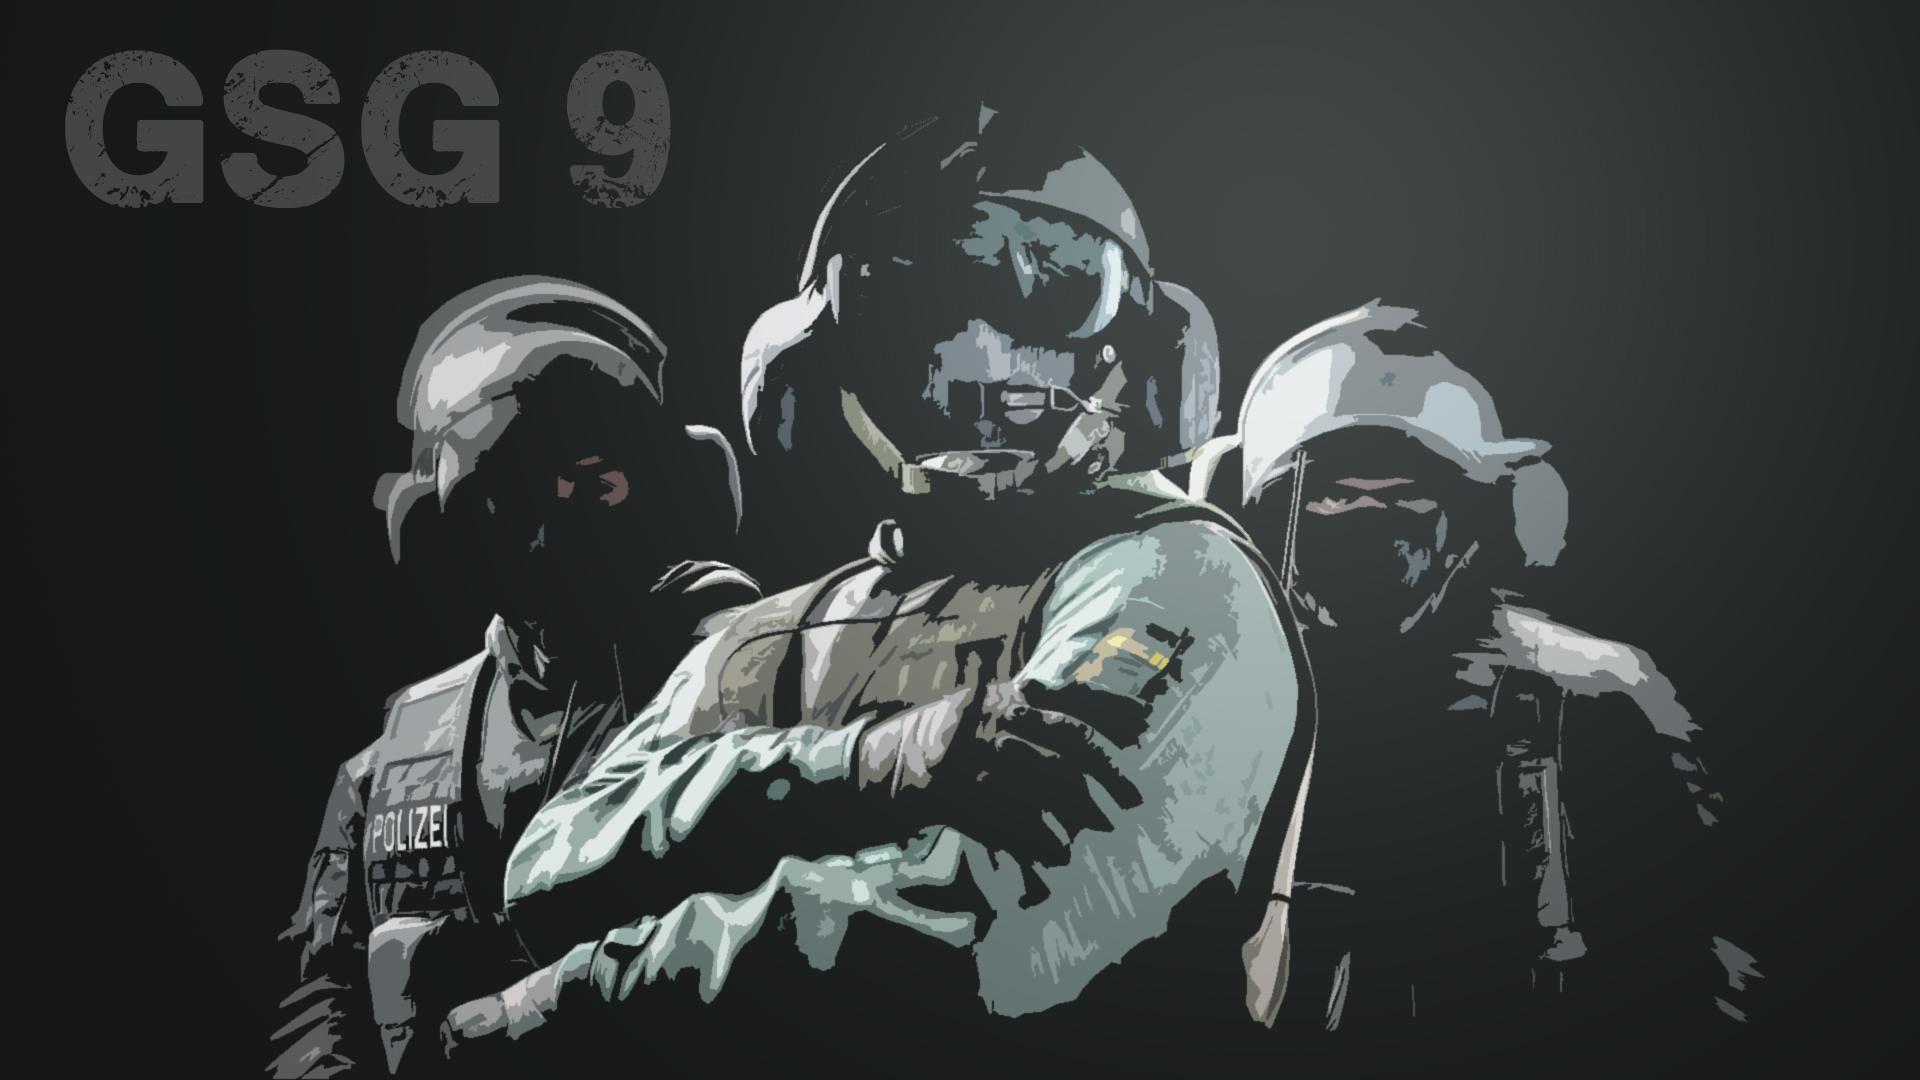 The GSG 9 Wallpaper as requested from some of you guys